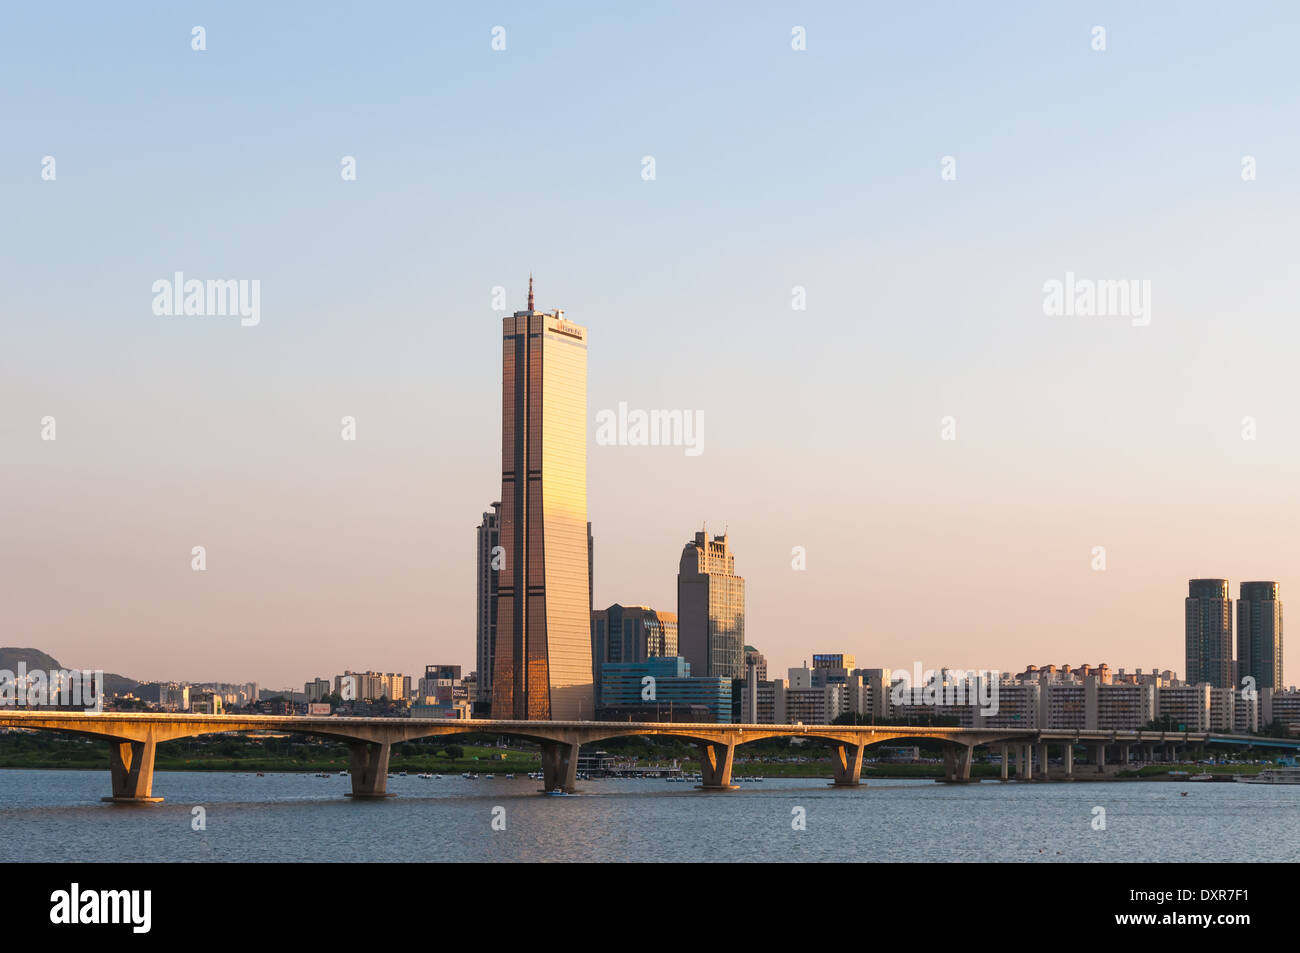 The skyscrapers of the Yeouido business district in Seoul, South Korea. Stock Photo